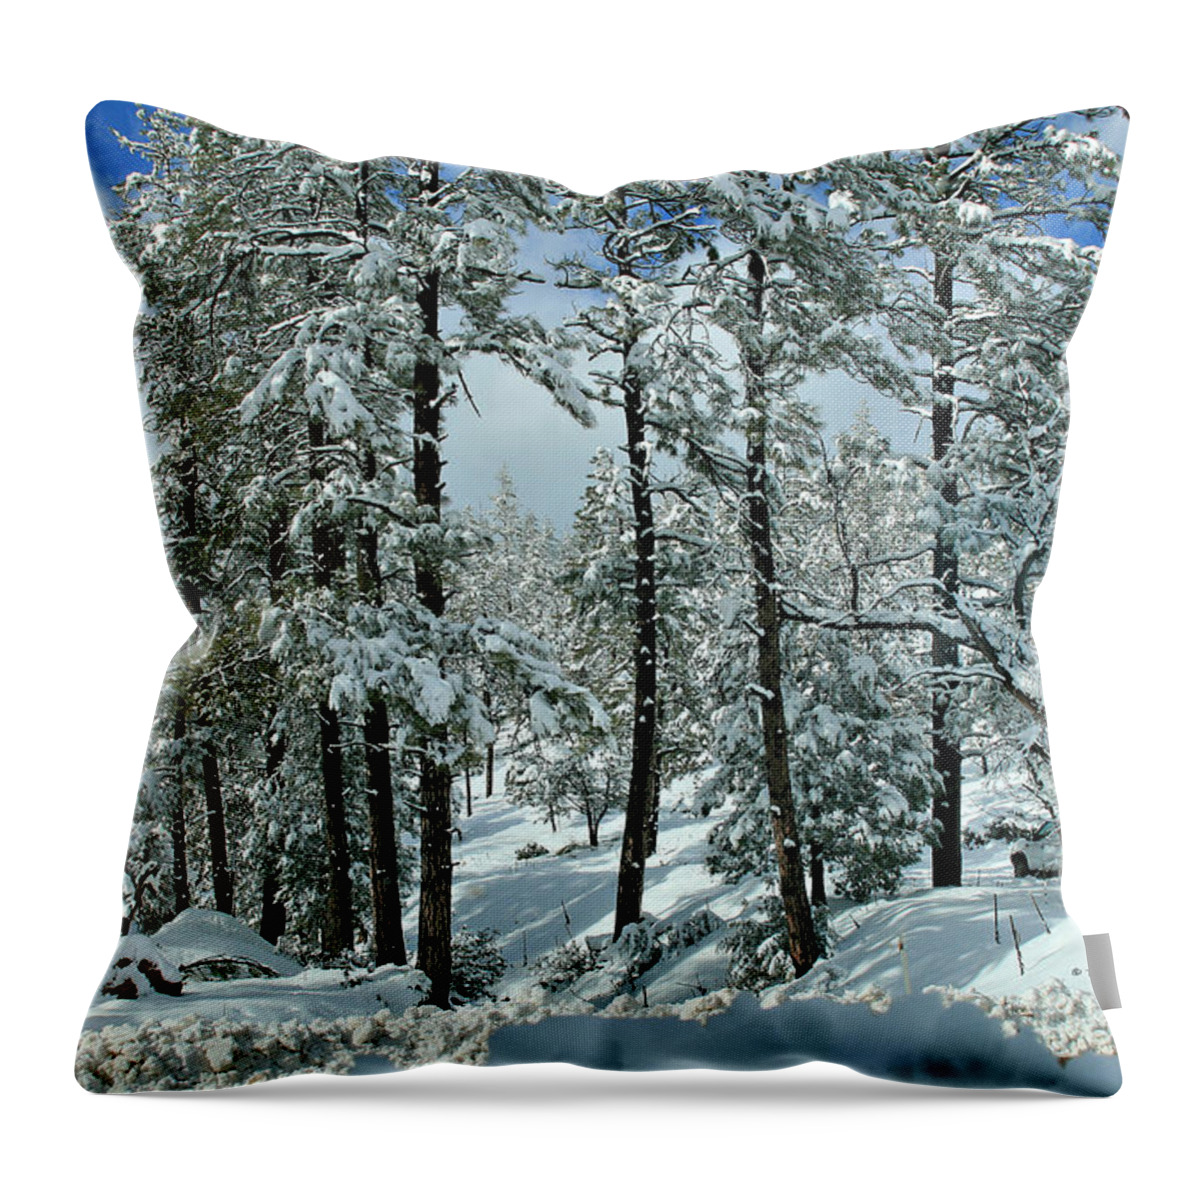 Landscape Throw Pillow featuring the photograph Whispering Snow by Matalyn Gardner